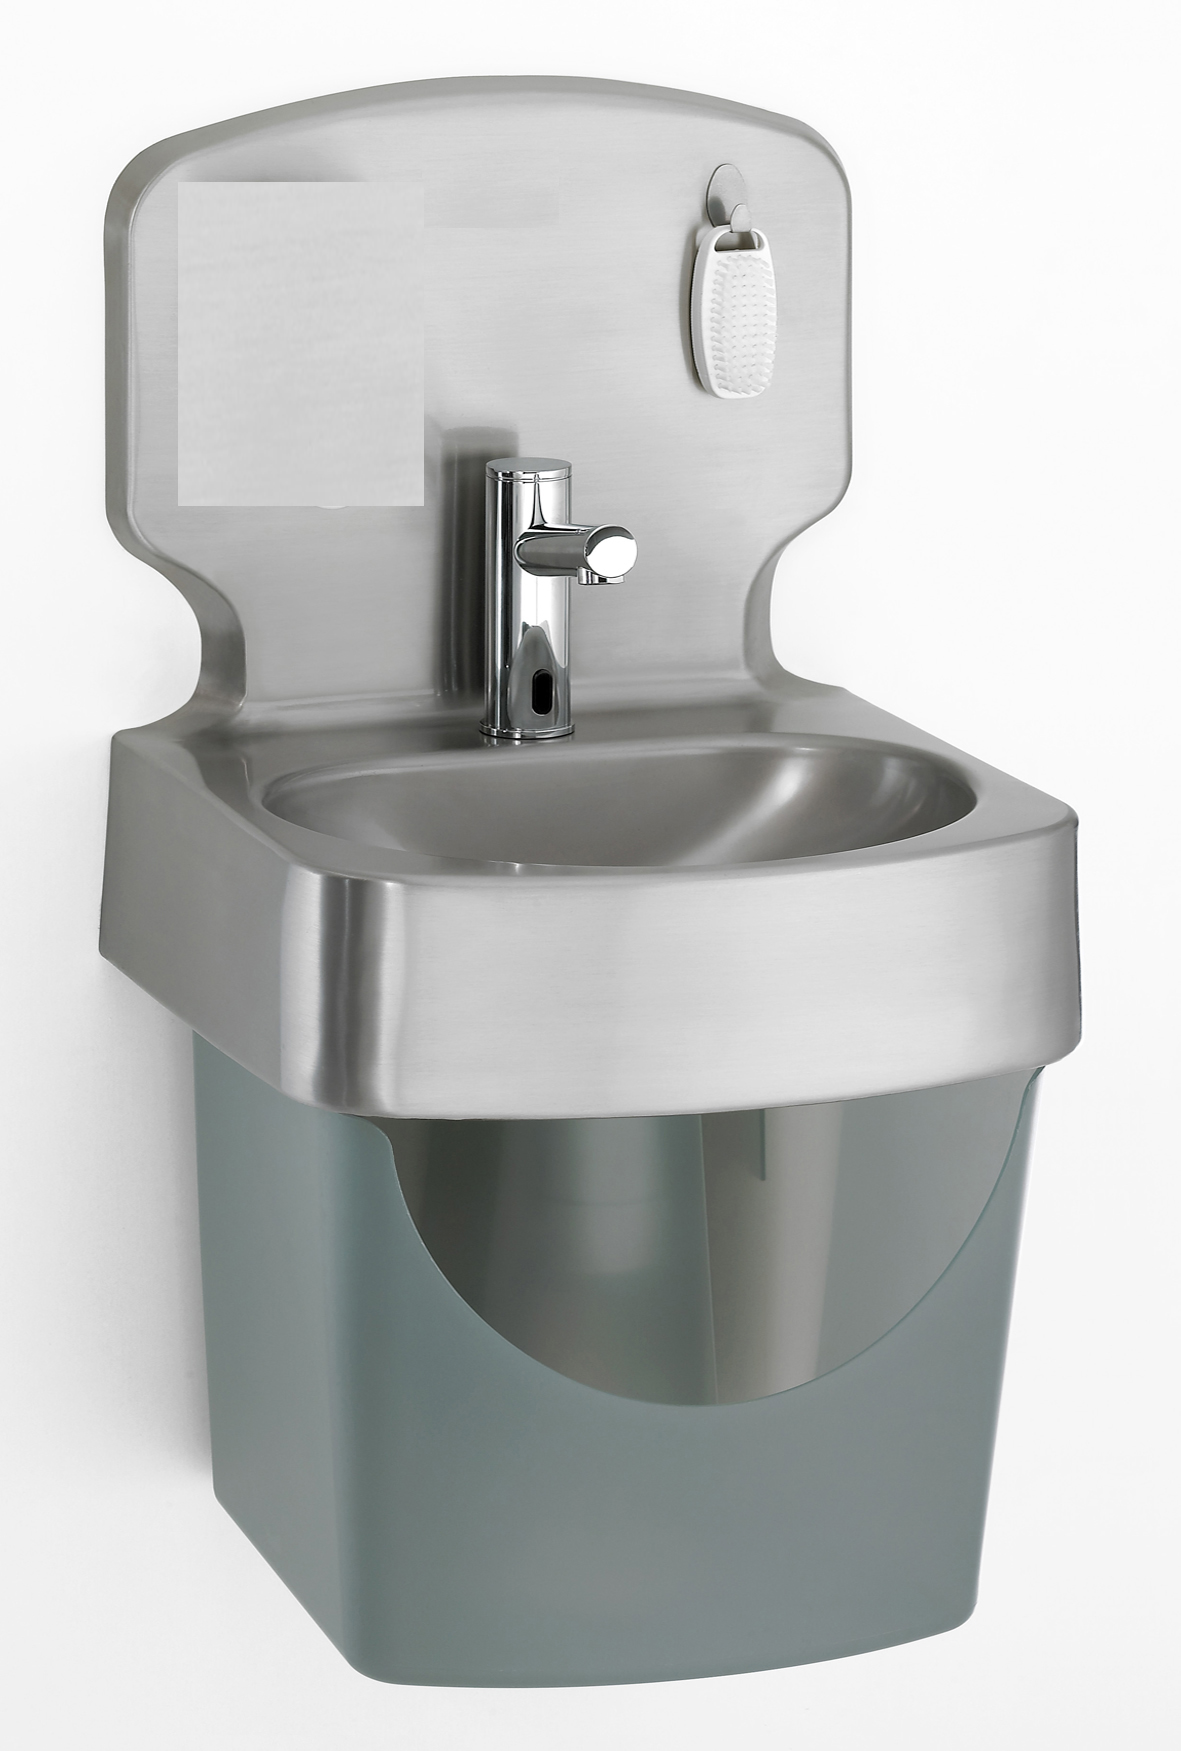 Wash Basin - Wall Hung Stainless Steel Electronic valve sink and